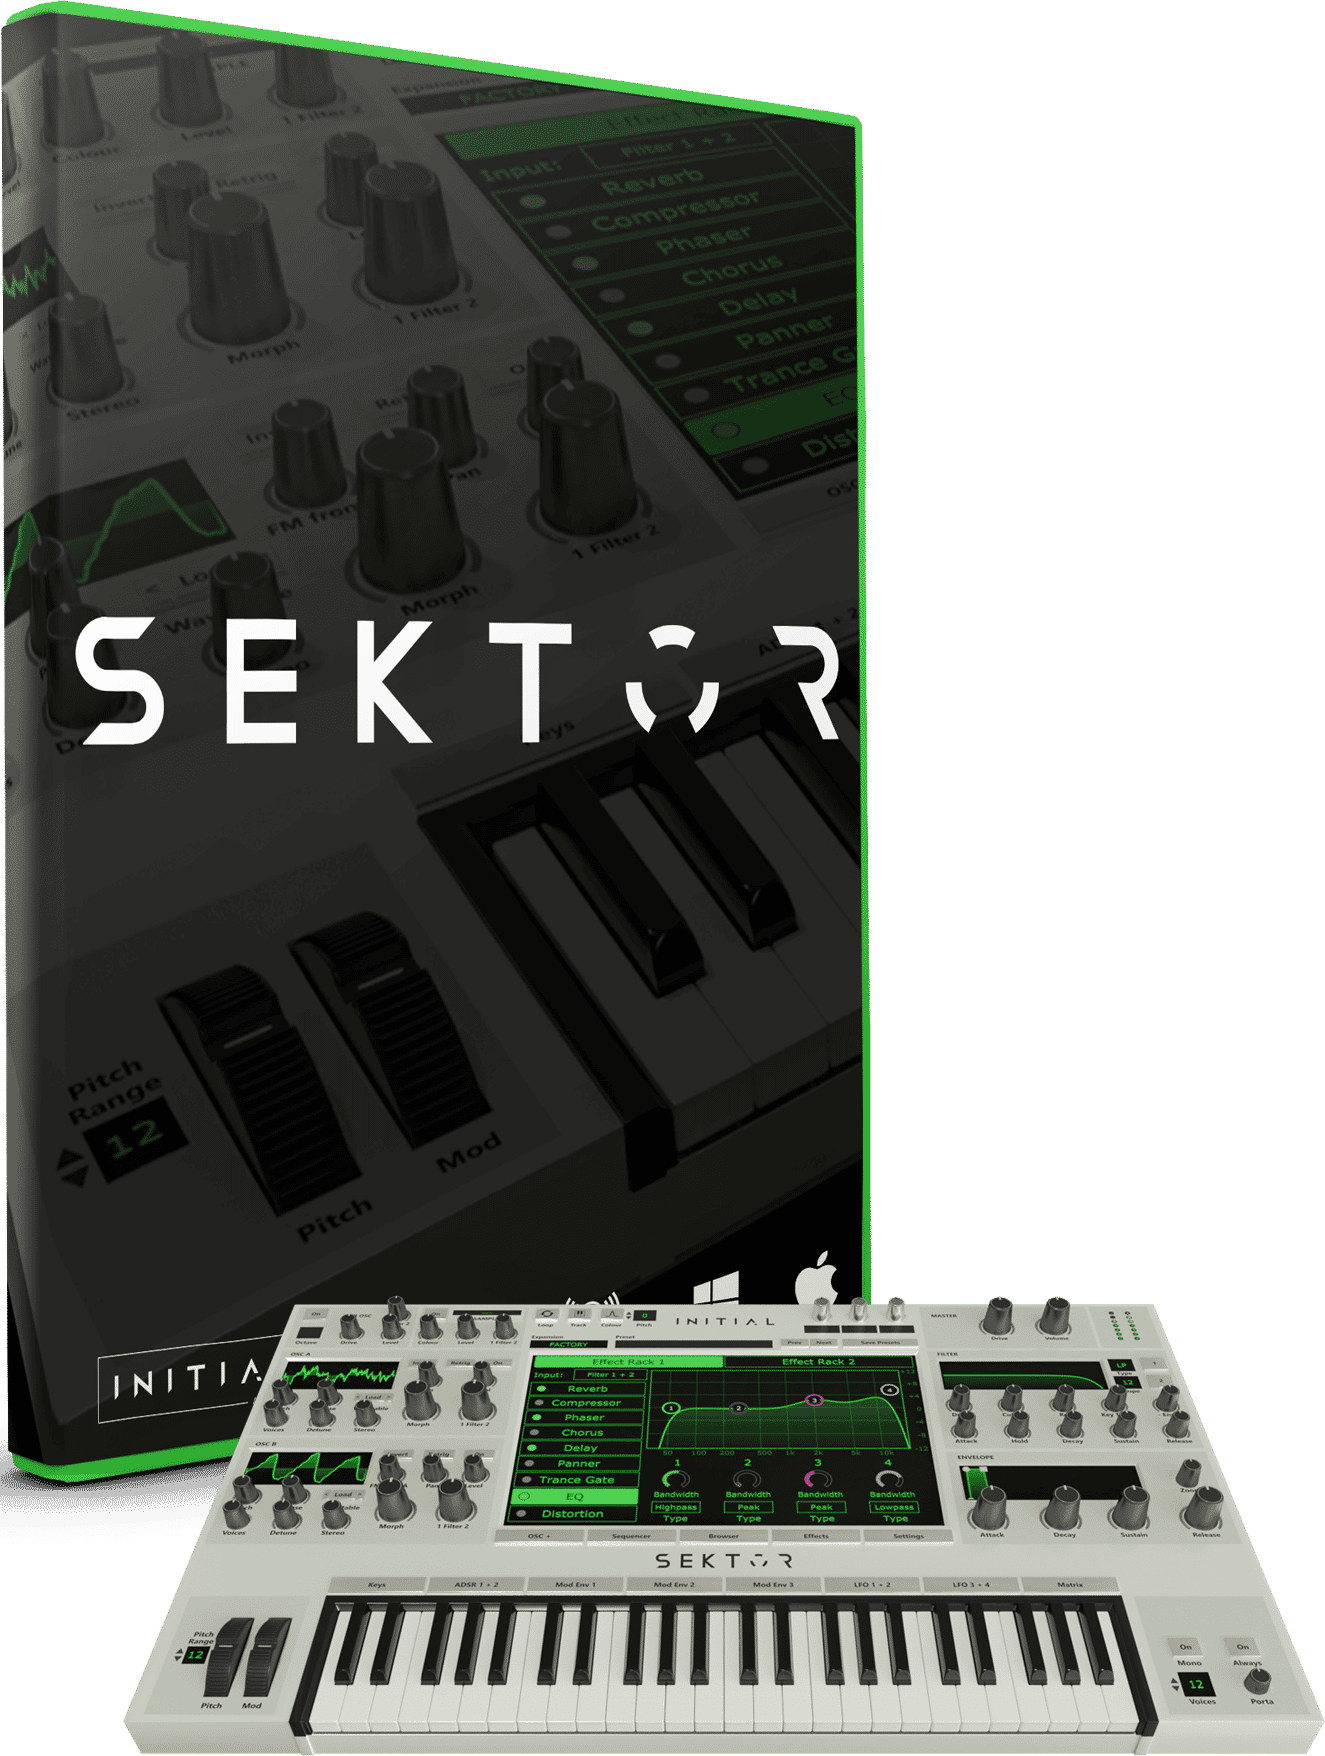 86% off “Sektor” by Initial Audio